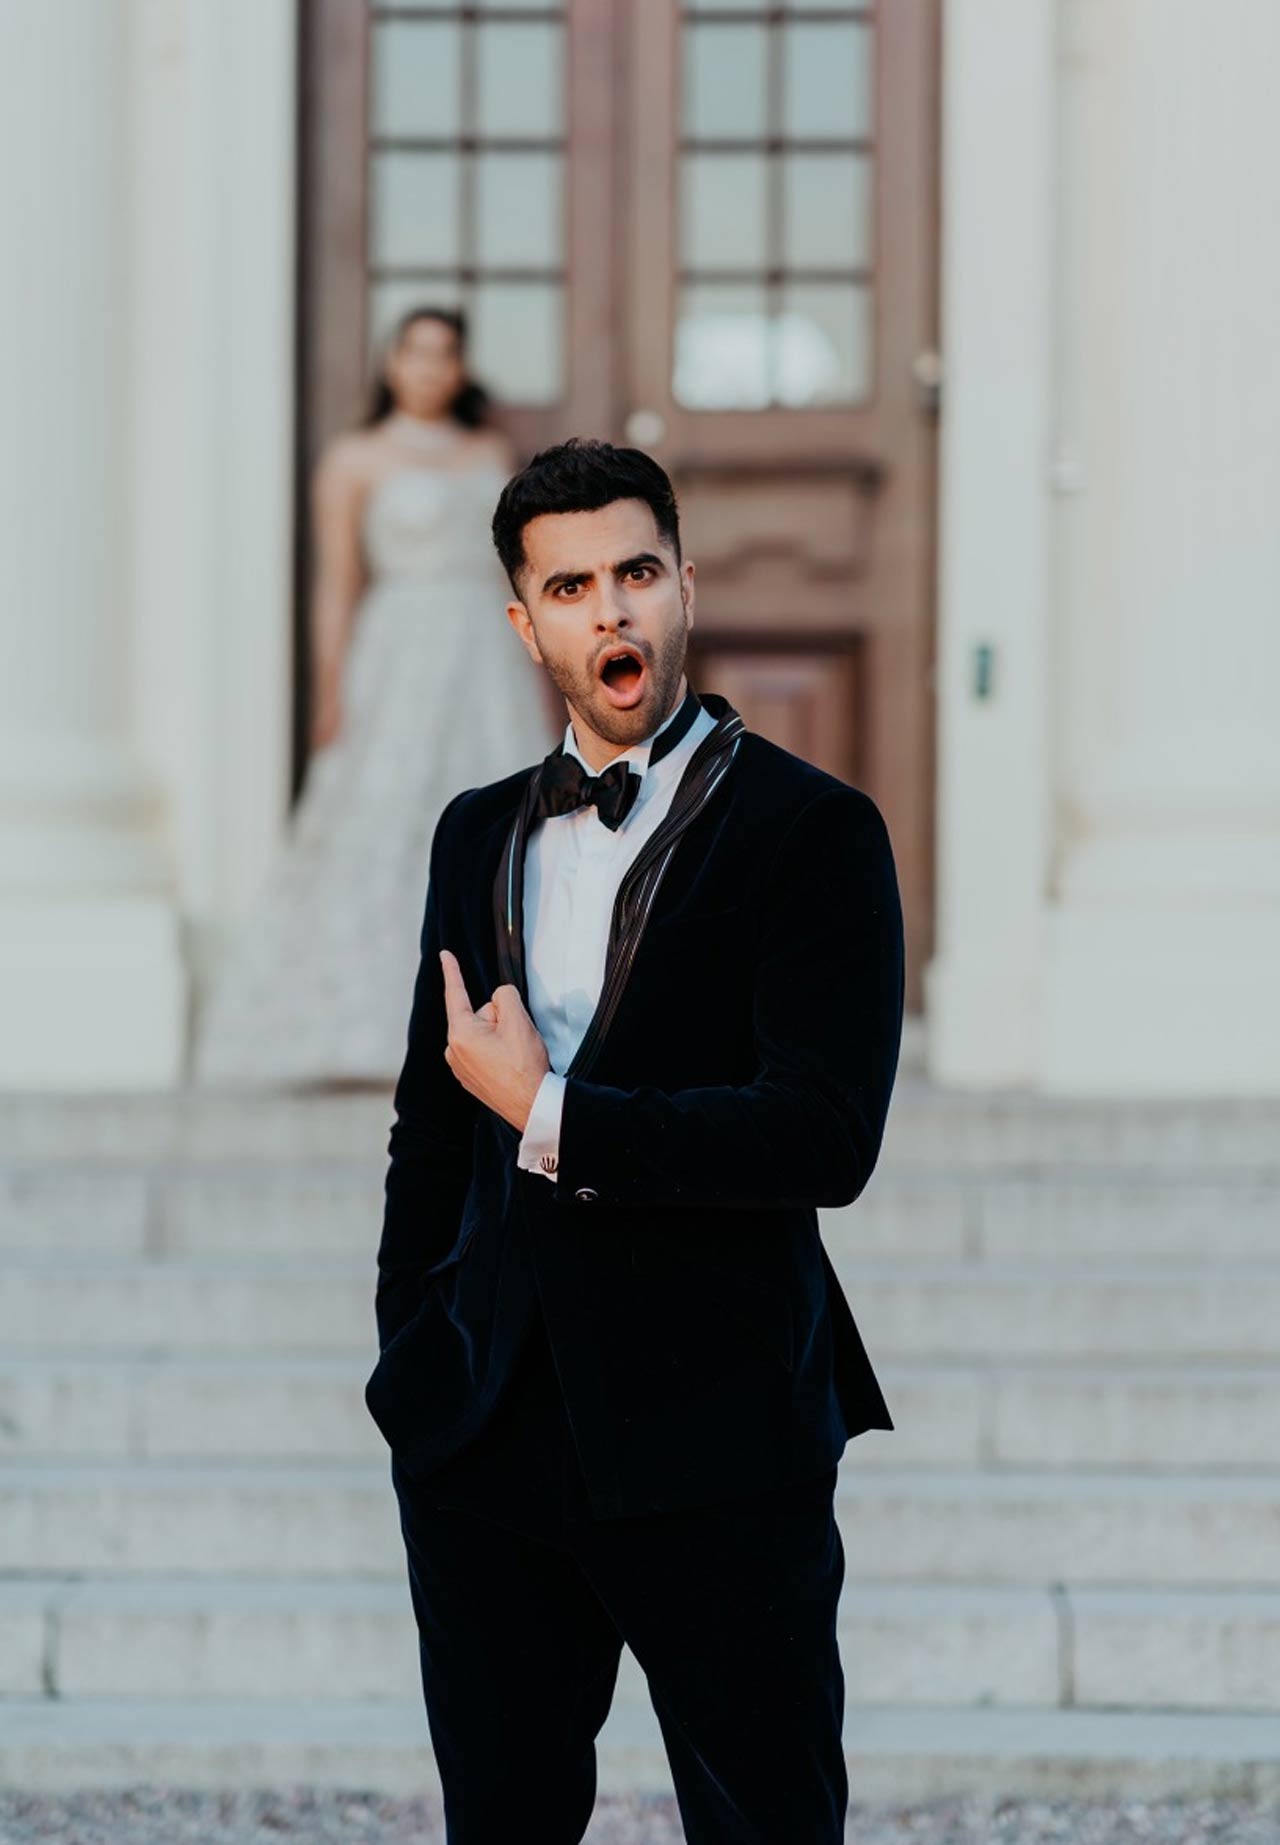 Ankur Rathee, Anuja Joshi tied the knot on June 15. And now, they have shared some stunning and stylish pictures from the Hawkstone Hall. Ankur captioned the post with the images- 